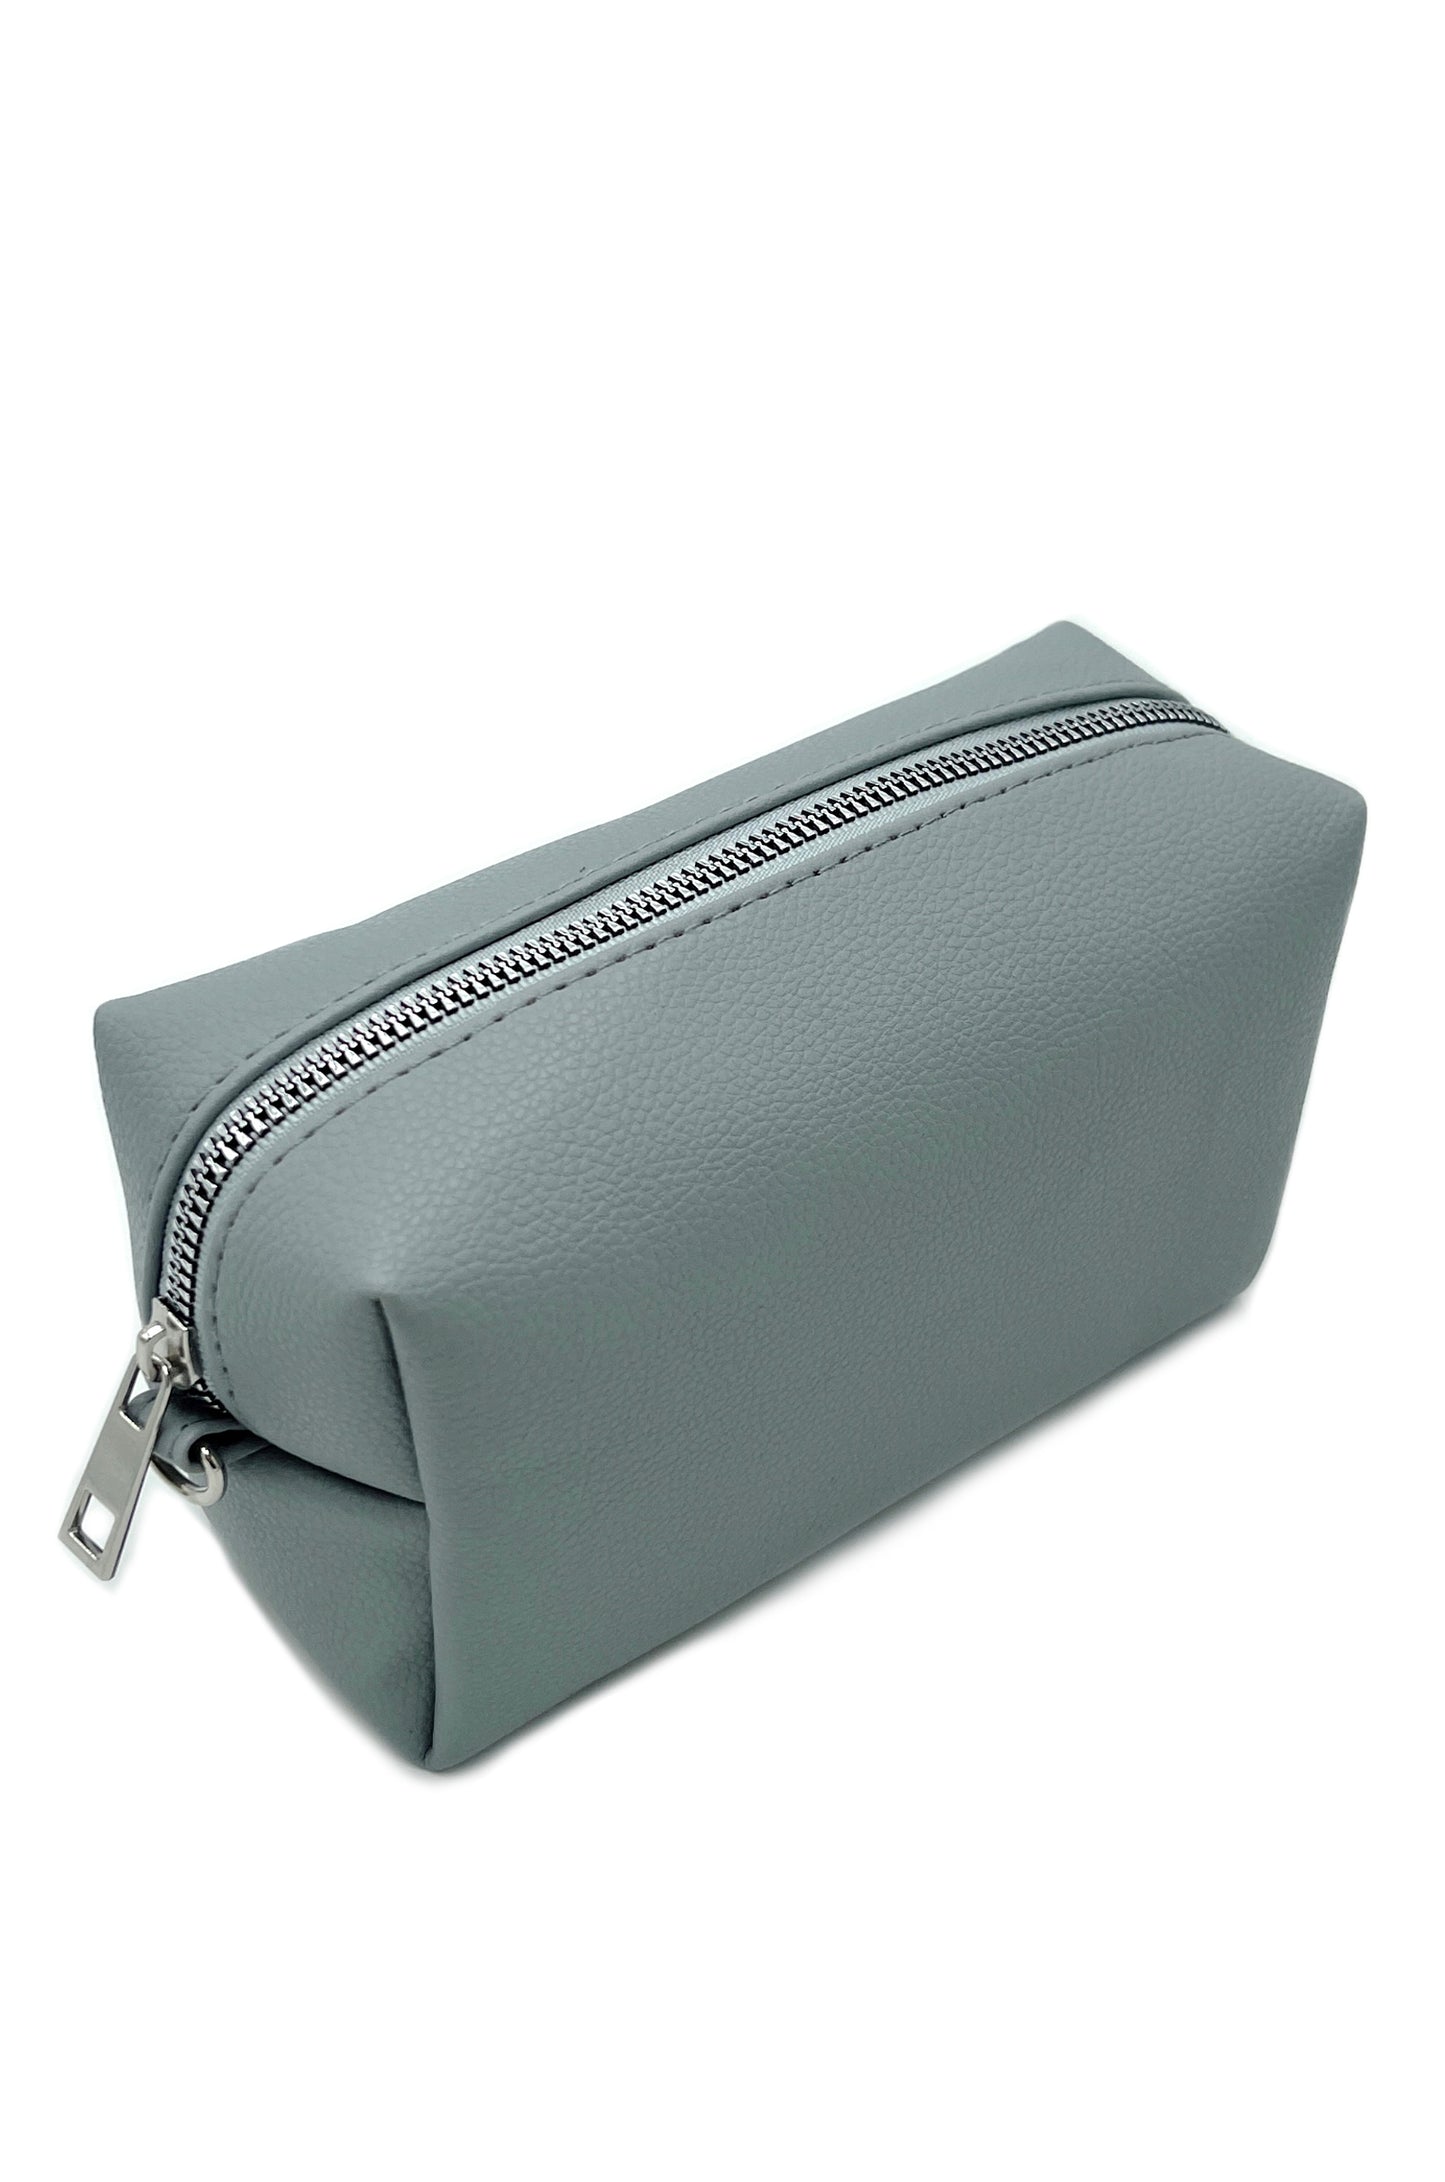 Shop for KW FashionSolid PU Pouch Bag at doeverythinginloveny.com wholesale fashion accessories